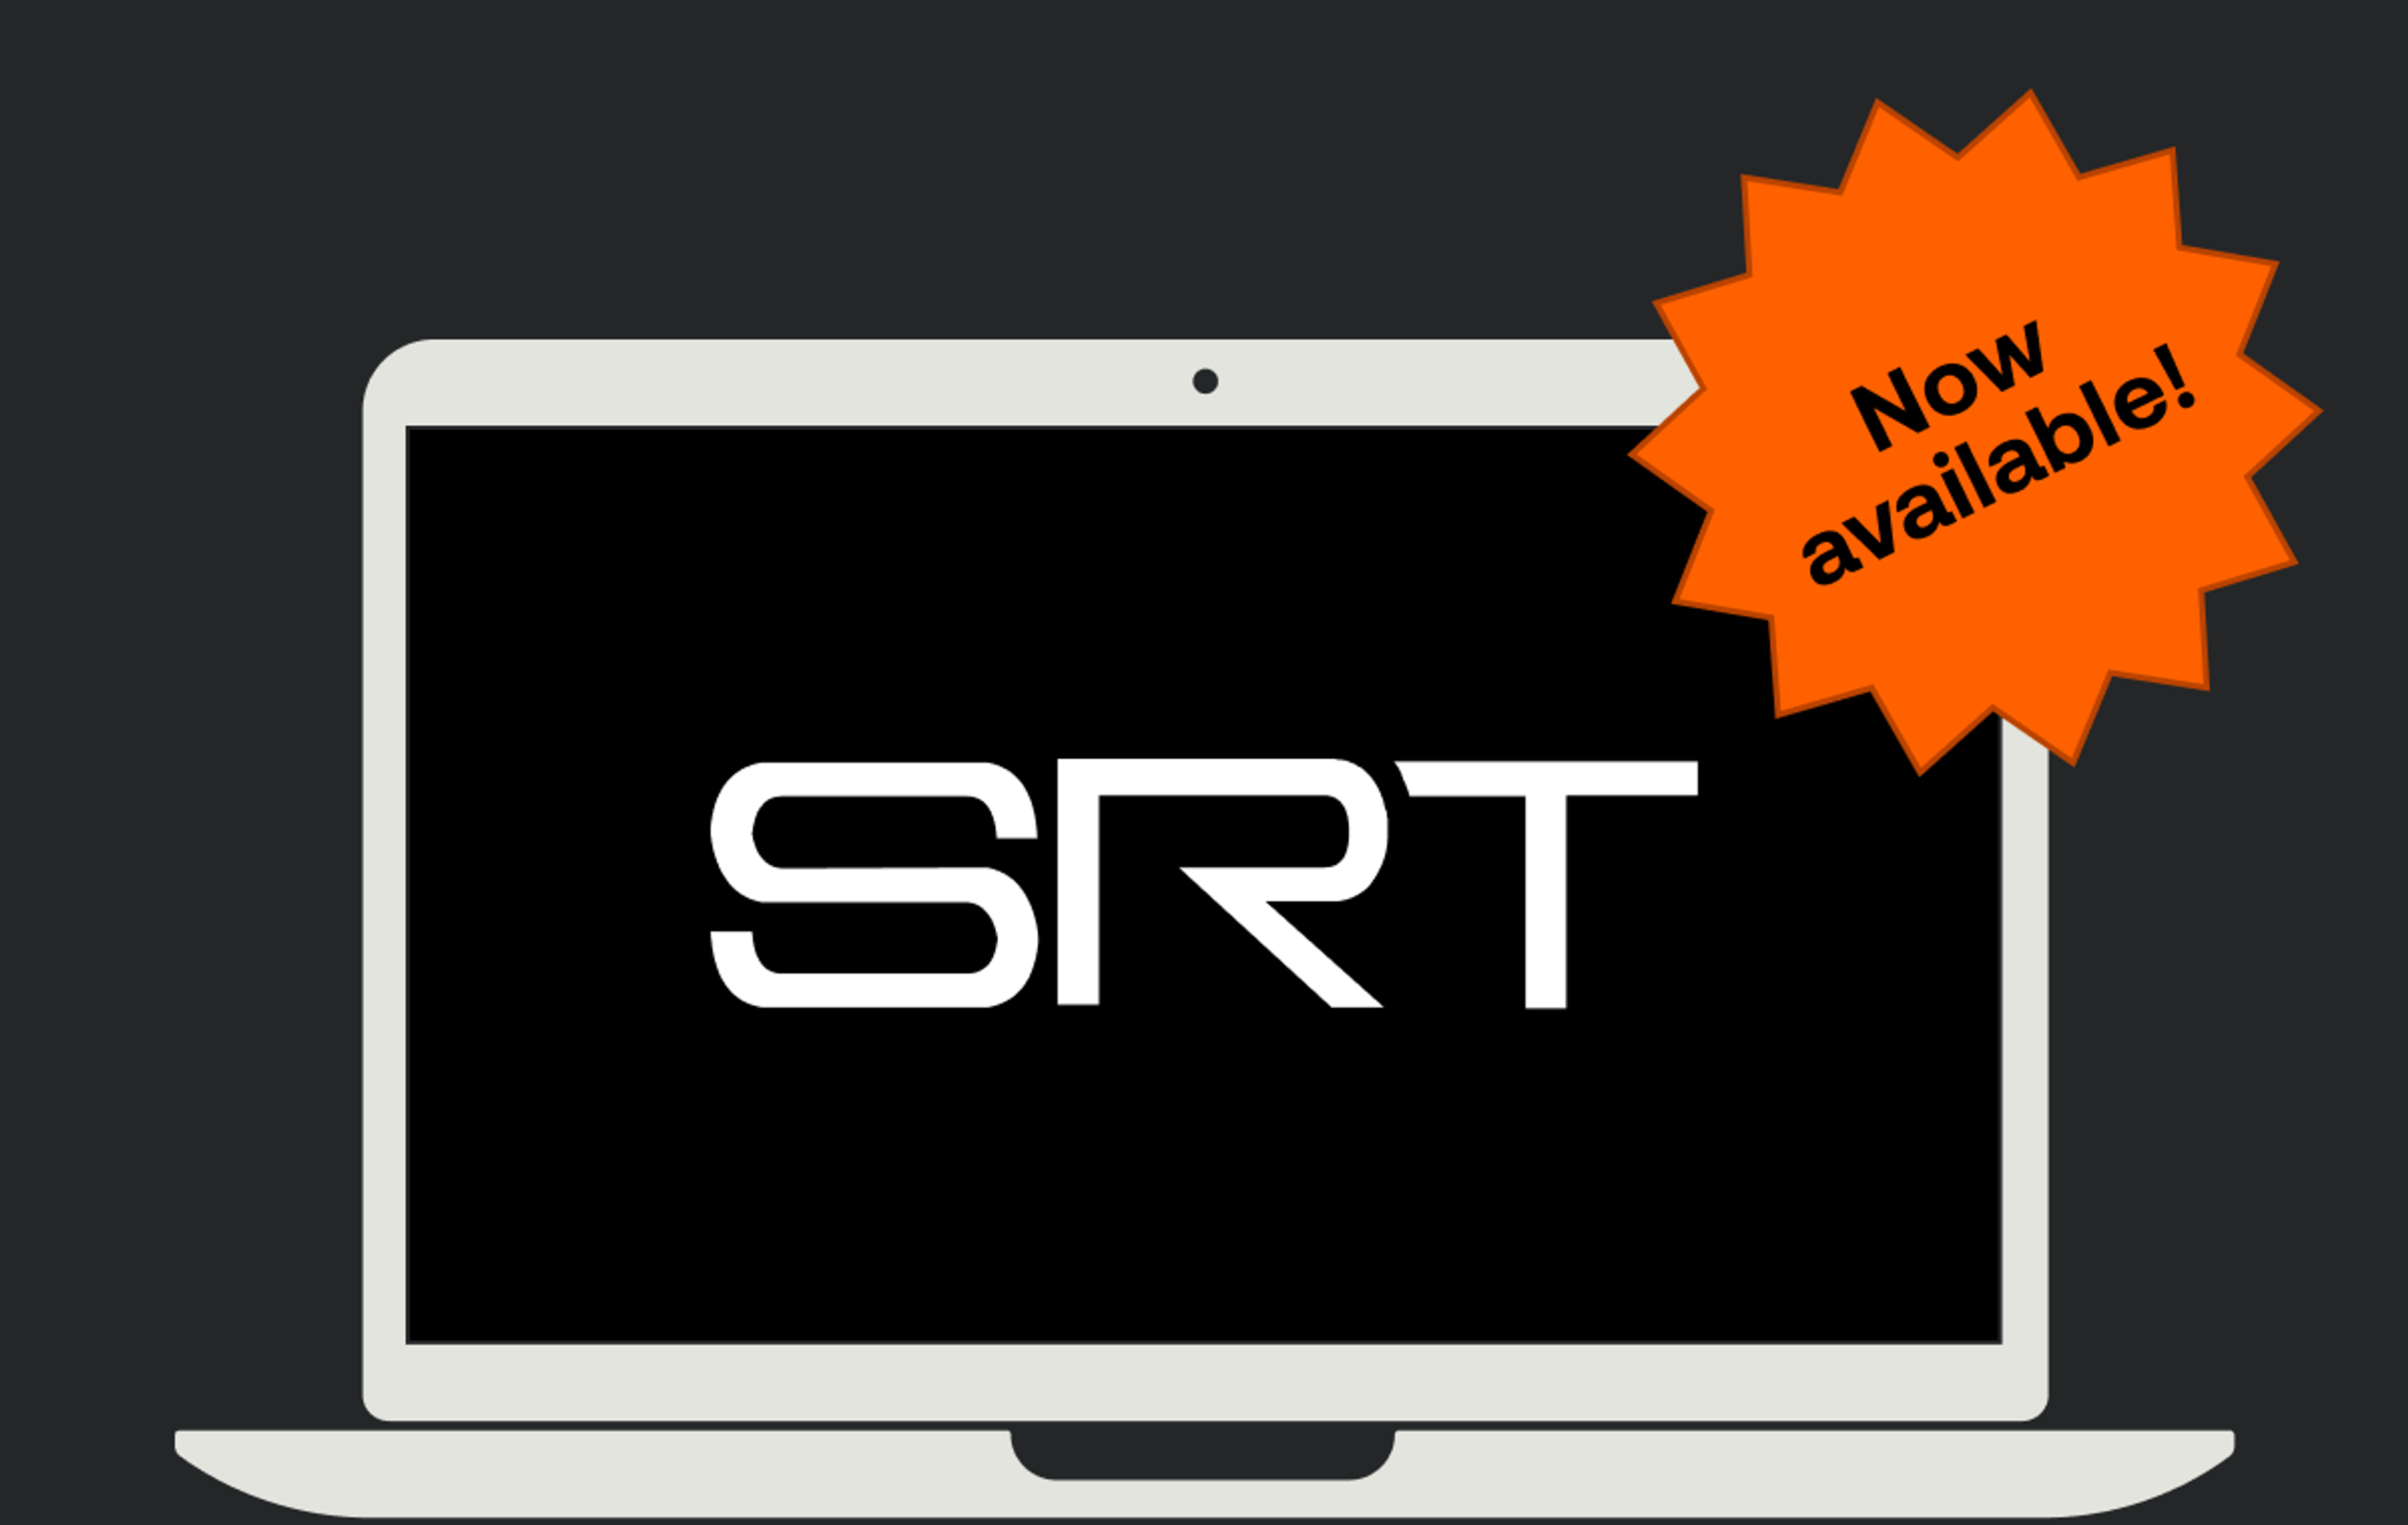 Image of a laptop on a black background. On the laptop is the SRT logo. A badge is on the corner of the laptop that reads "now available". 